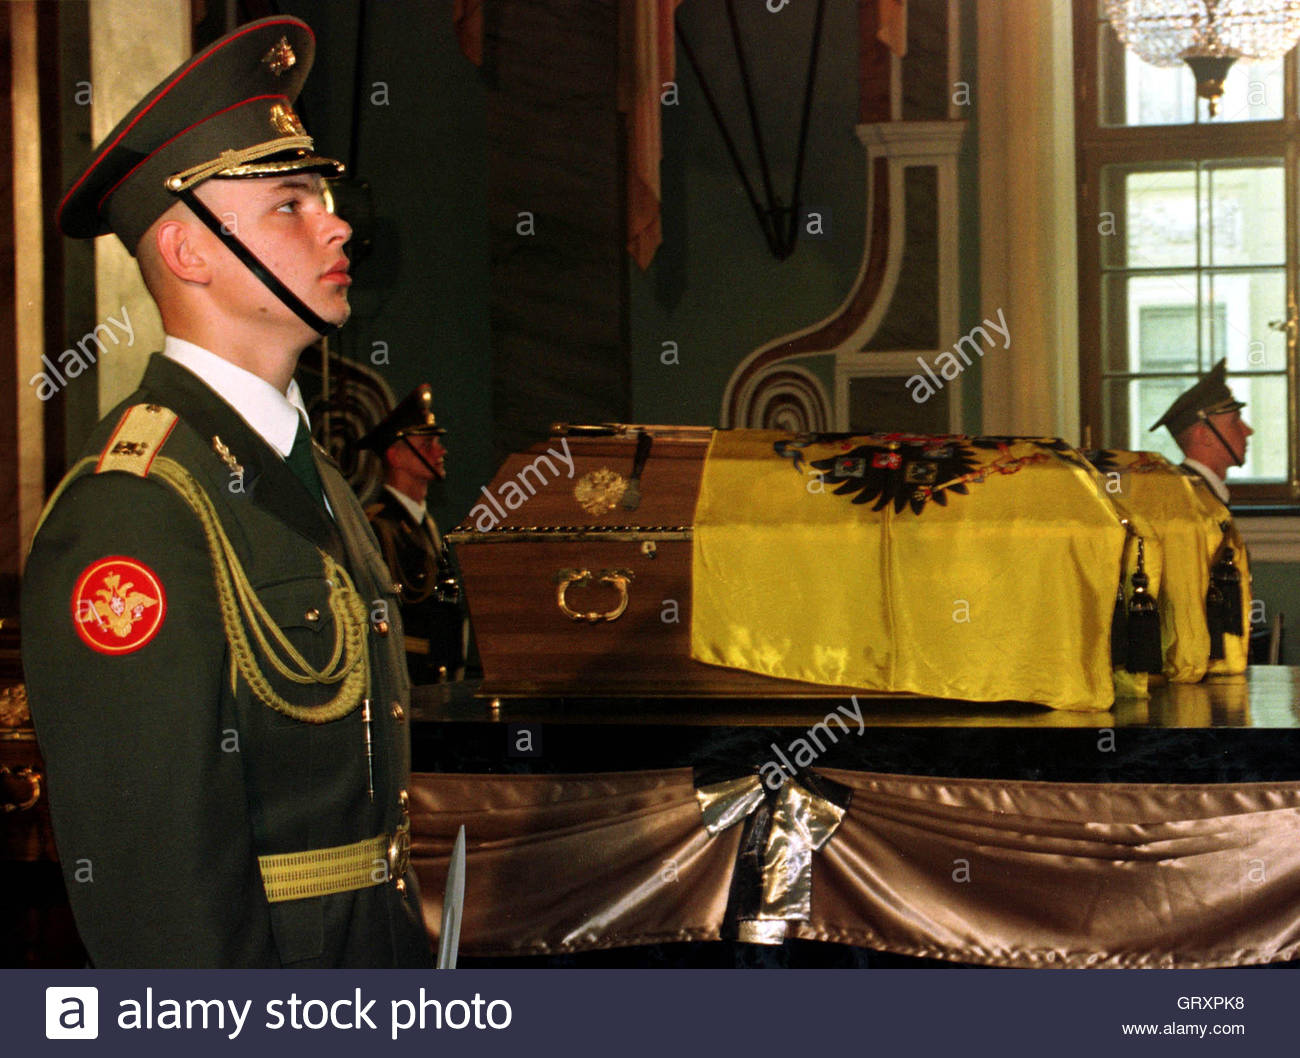 Image result for The Russian last Tsars remains funeral ceremony